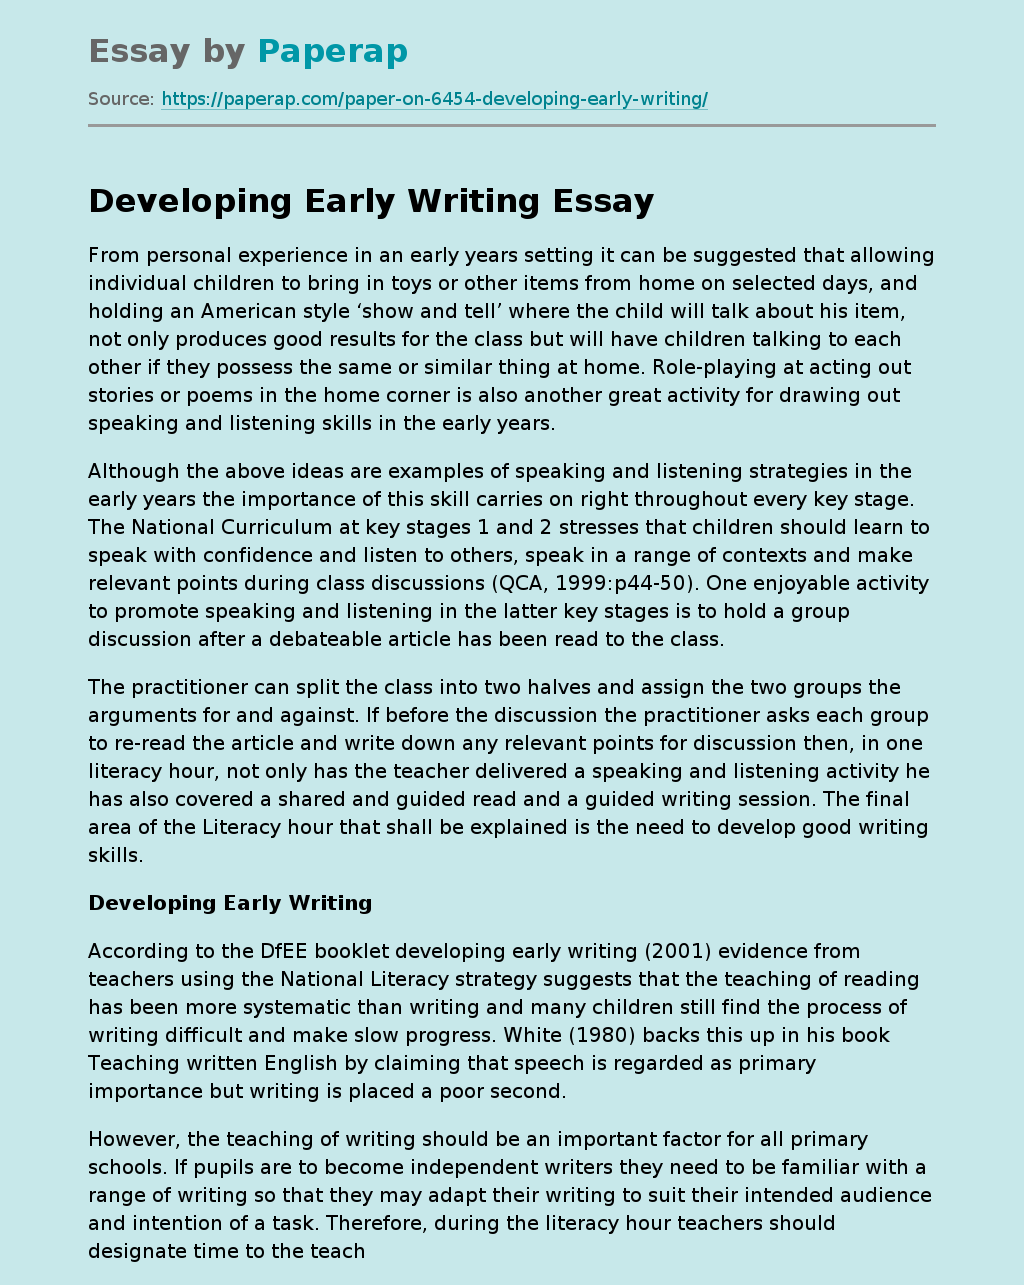 Developing Early Writing